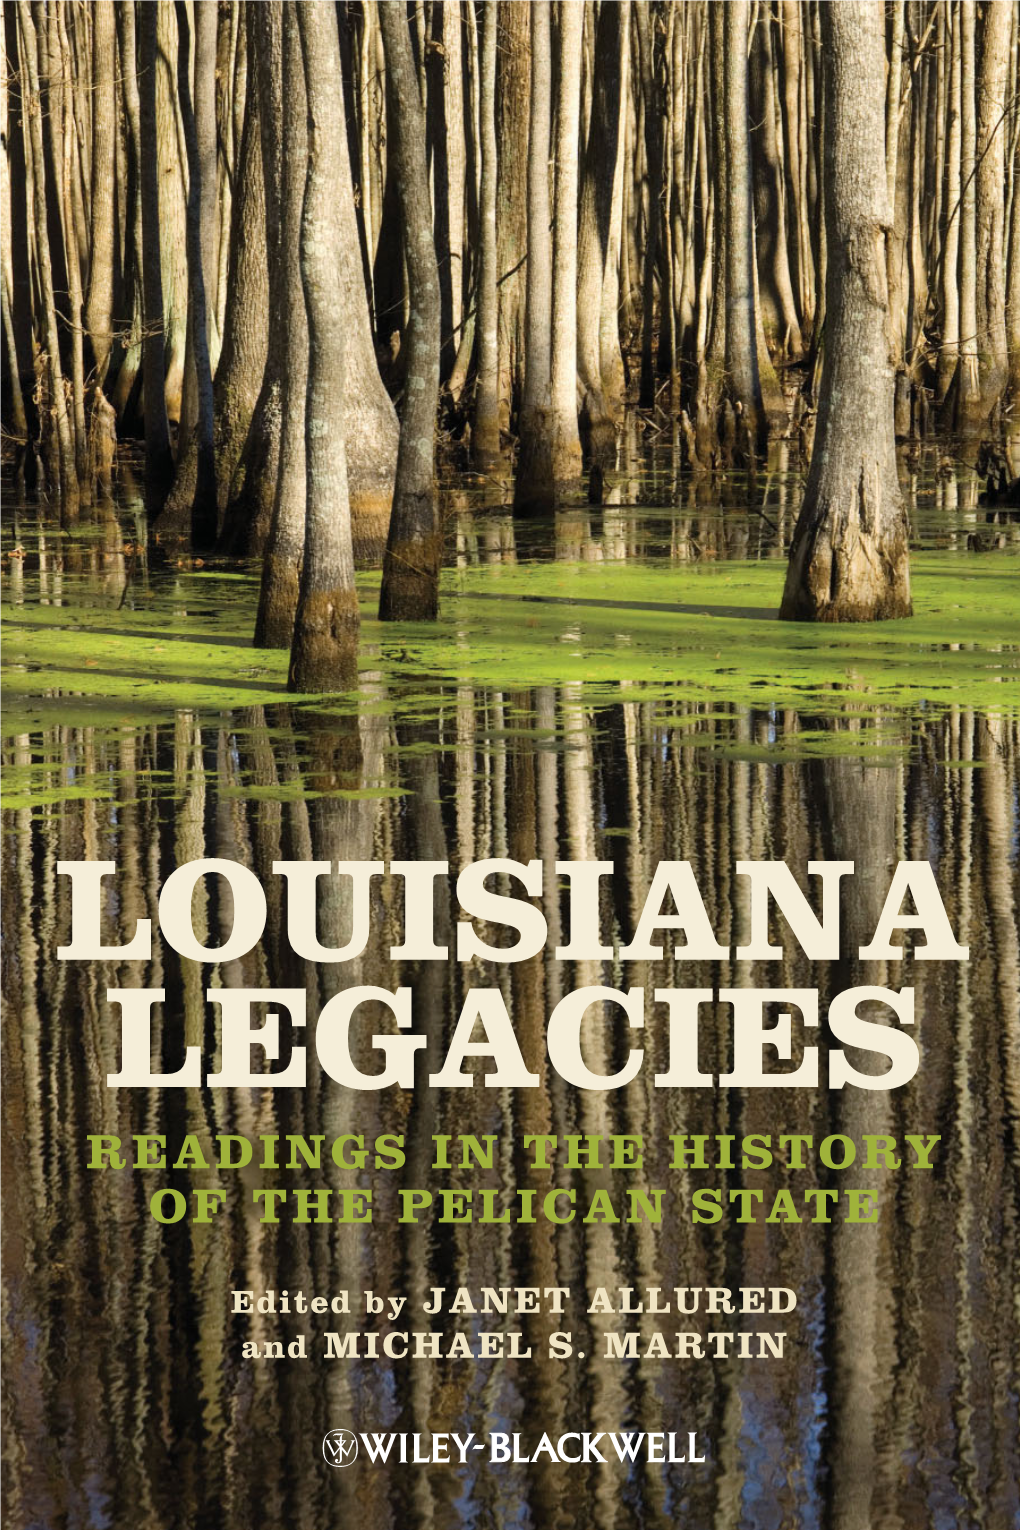 Louisiana Legacies Readings in the History of the Pelican State